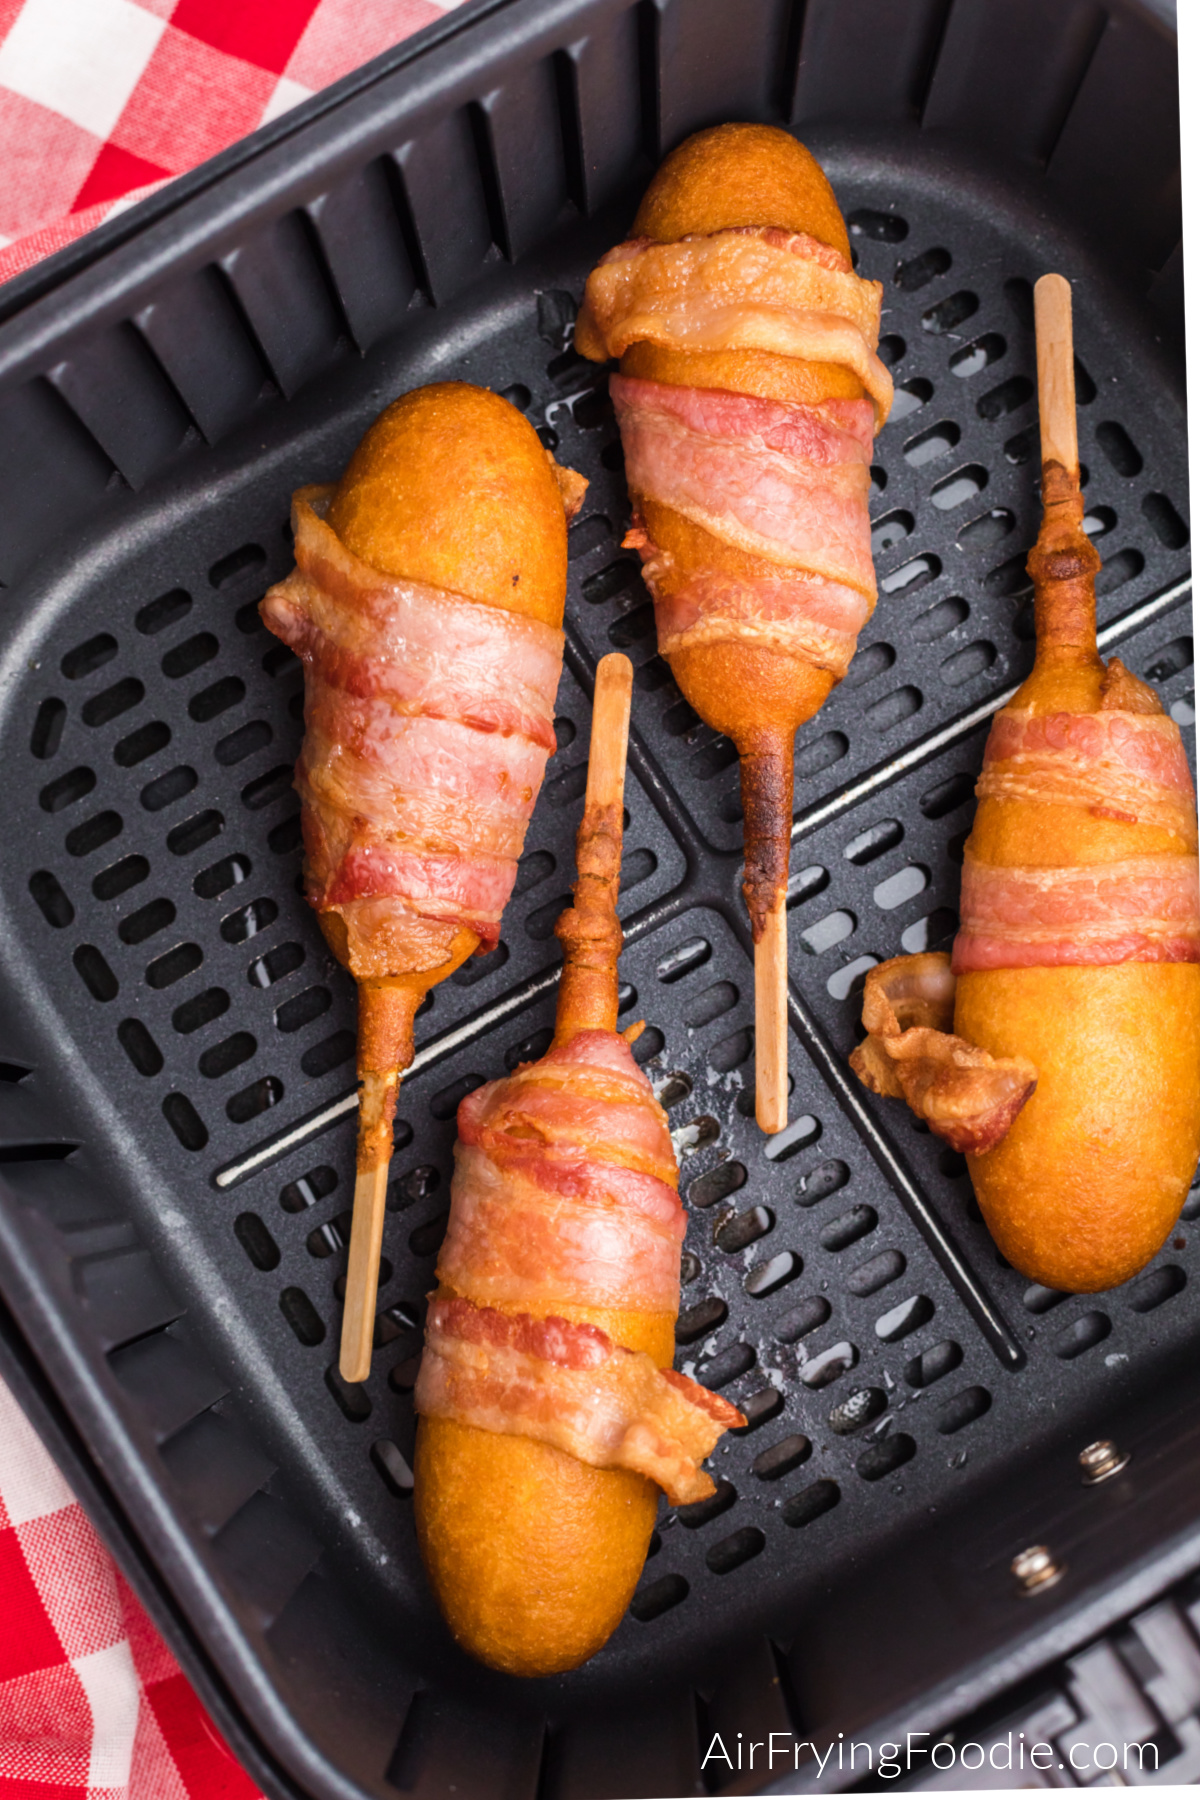 Bacon wrapped corn dogs in the air fryer basket, ready to serve.